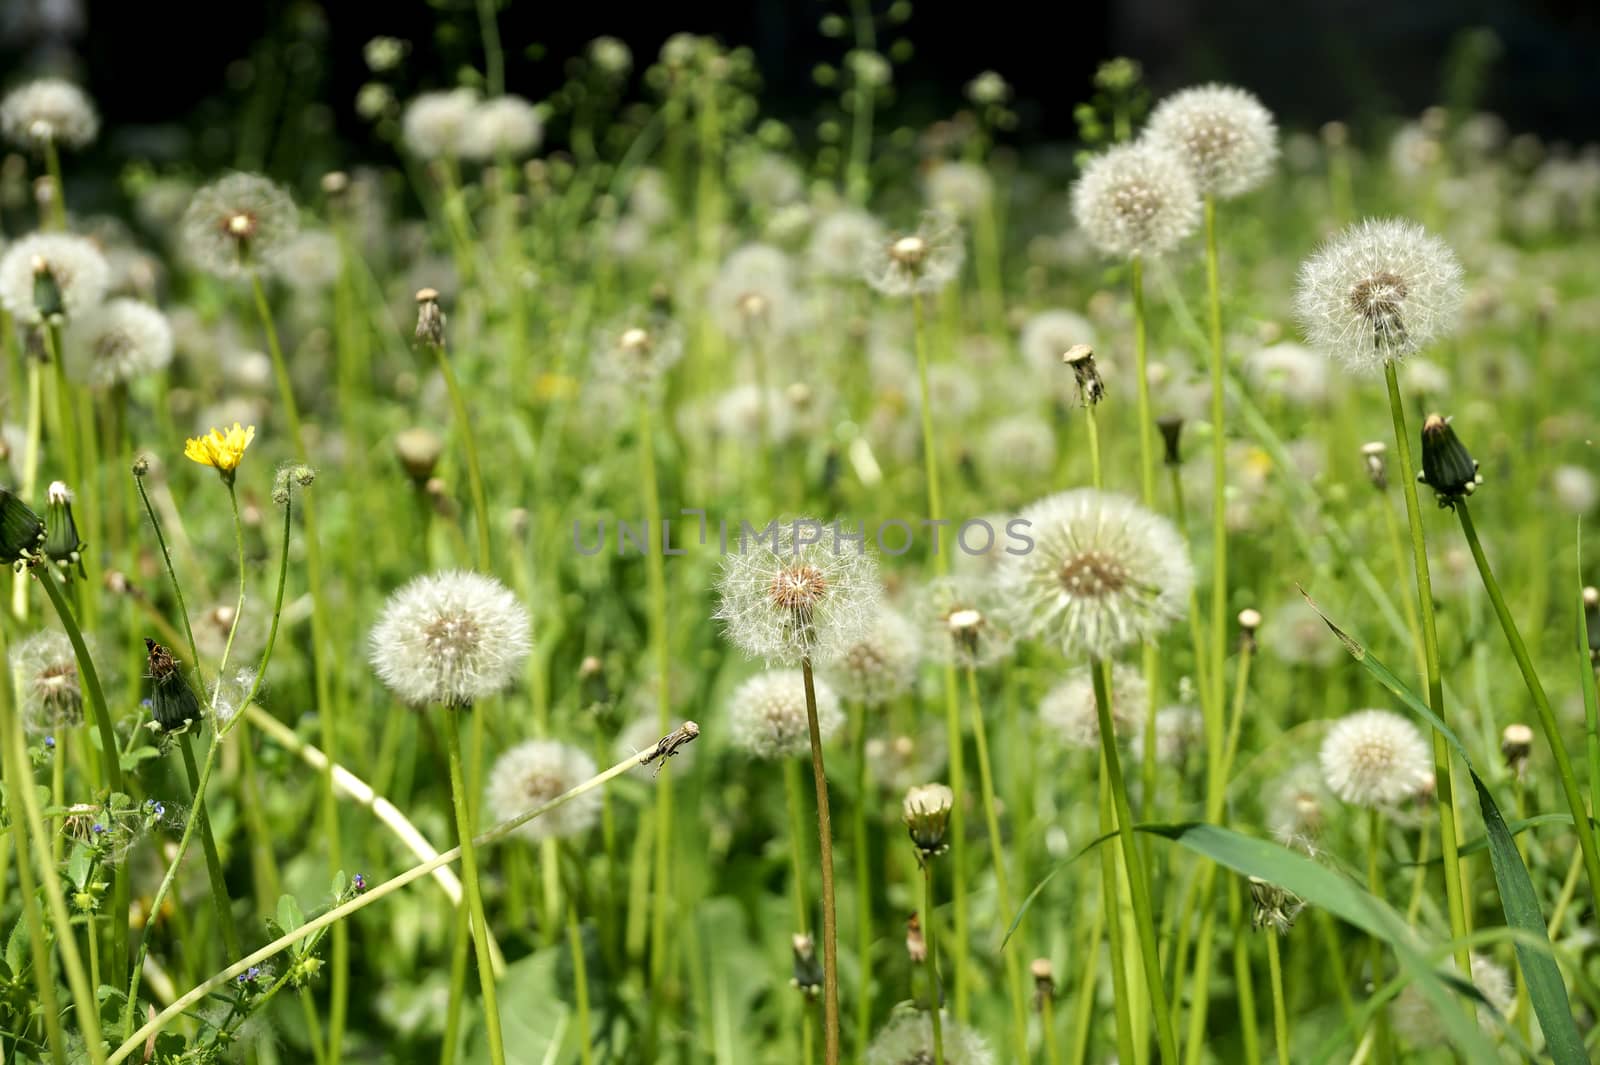 Mature dandelions on a lawn in the city yard by Vadimdem